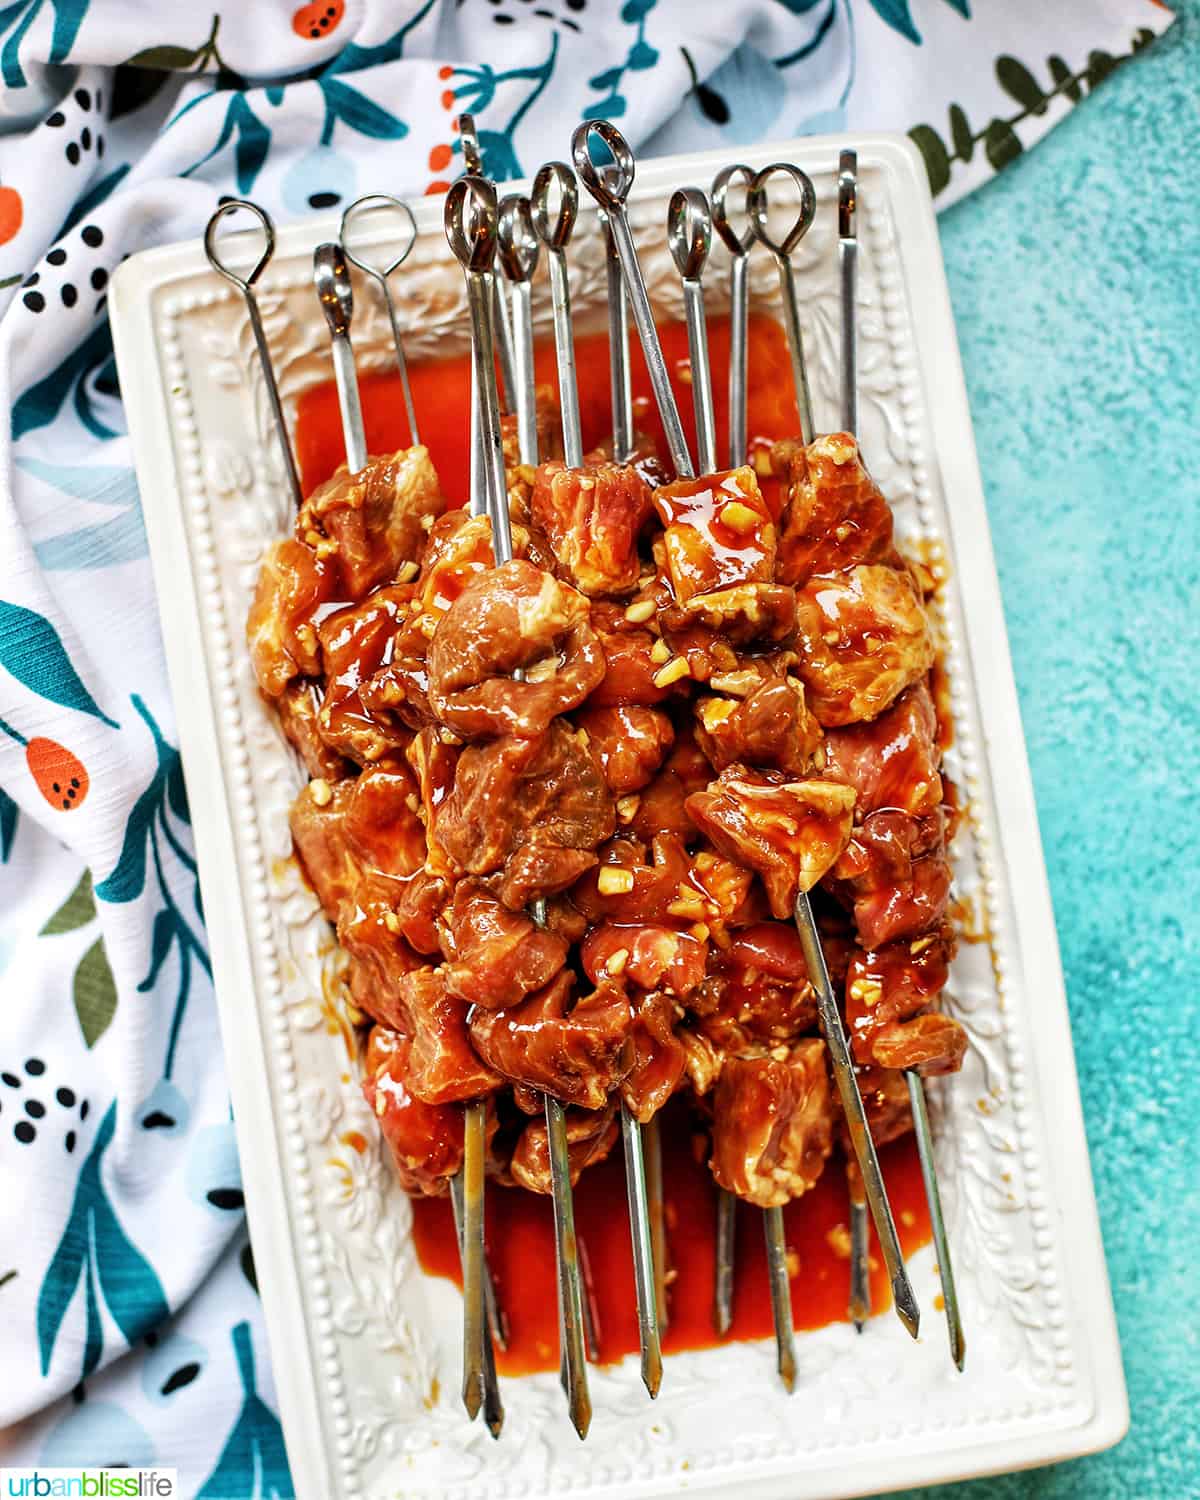 raw Filipino BBQ pork skewers on a white platter with a colorful napkin, all on a bright blue background.